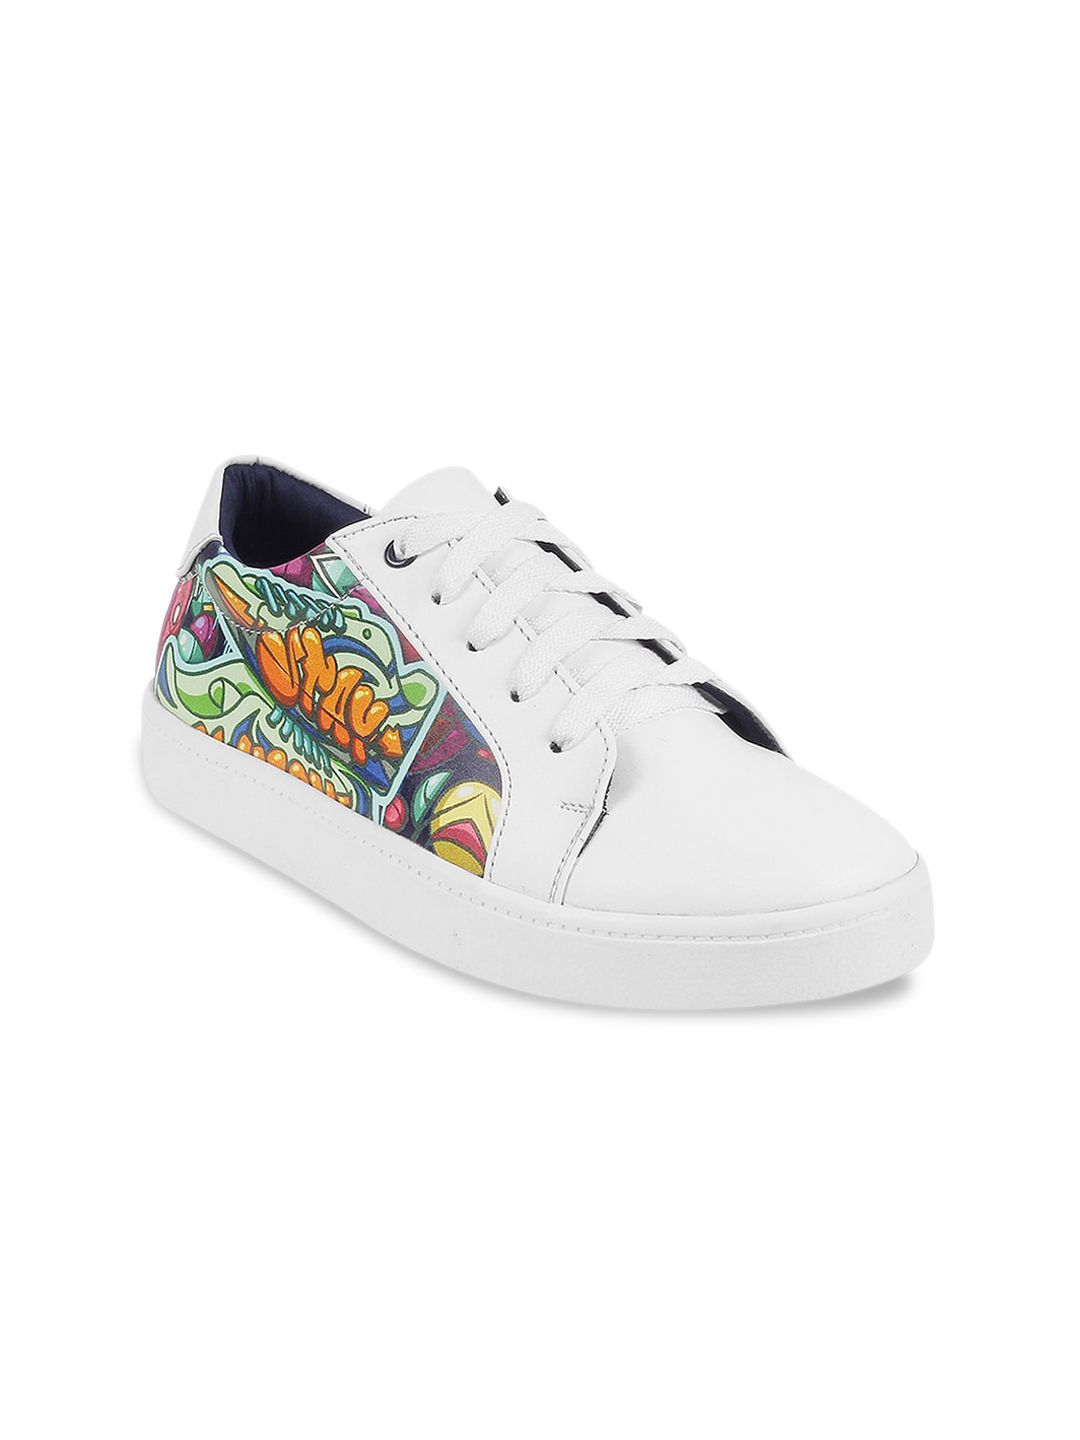 Mochi Women White Printed Sneakers Price in India